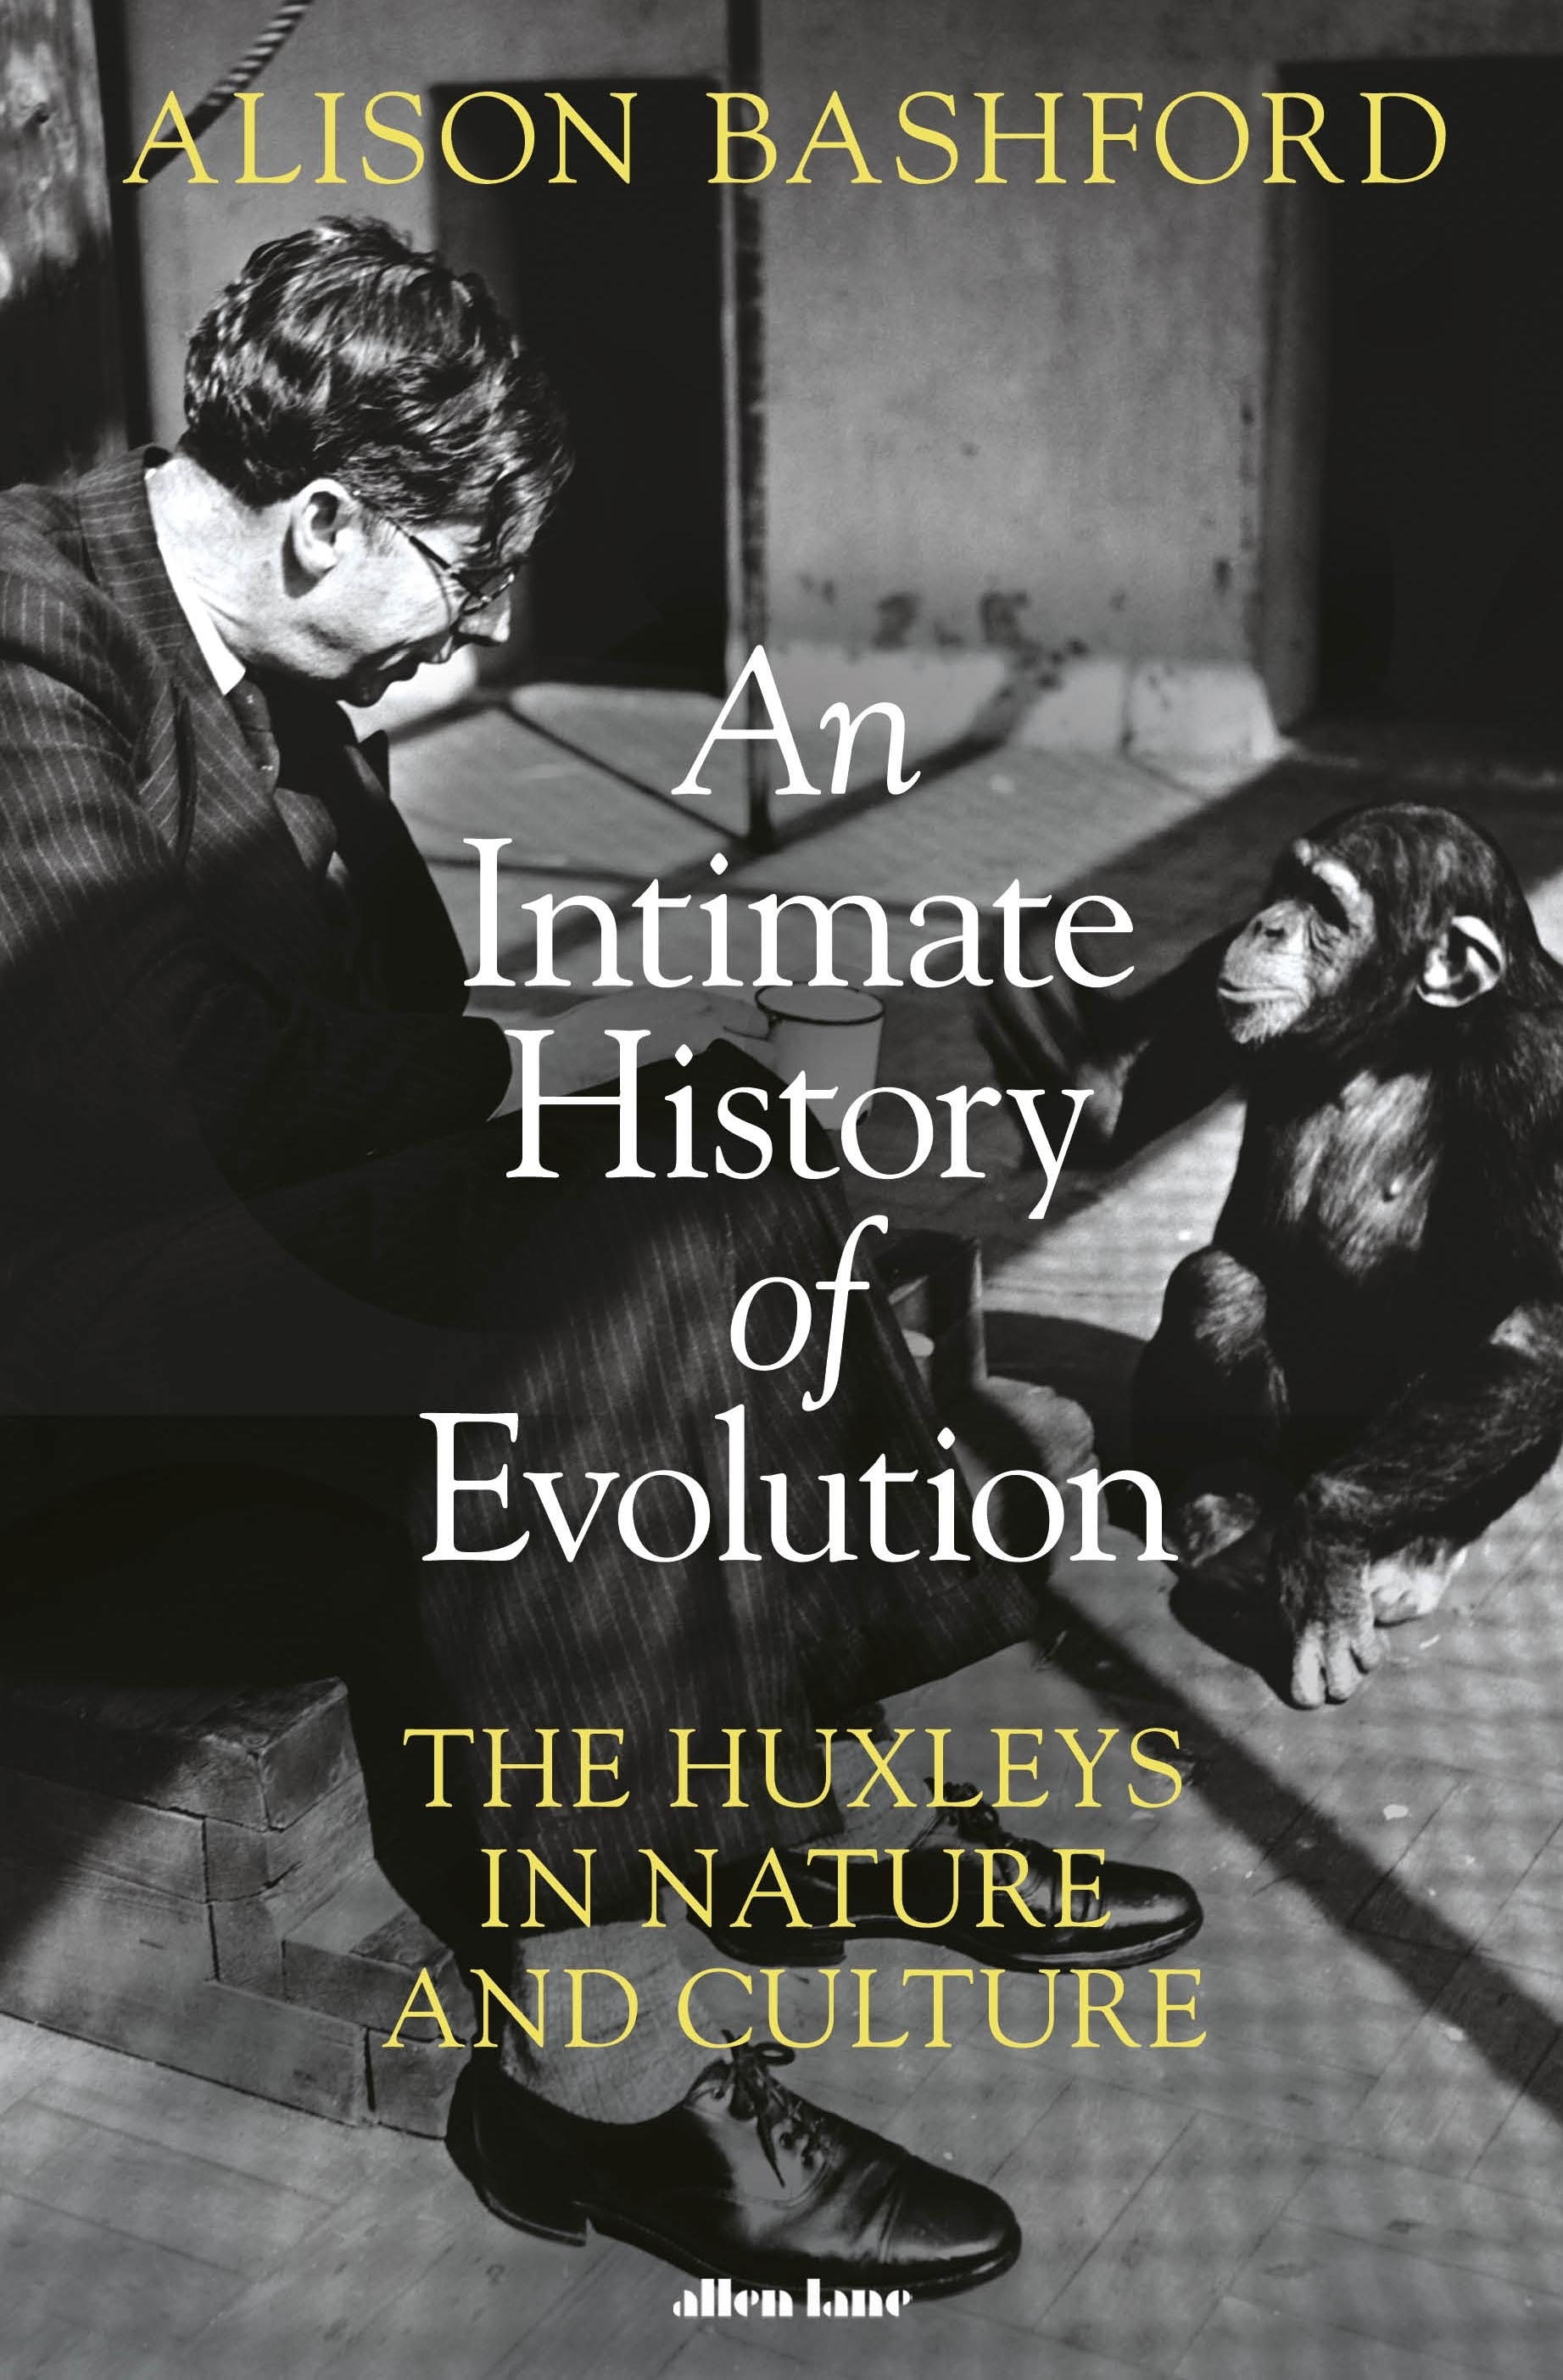 Book “An Intimate History of Evolution” by Alison Bashford — October 6, 2022